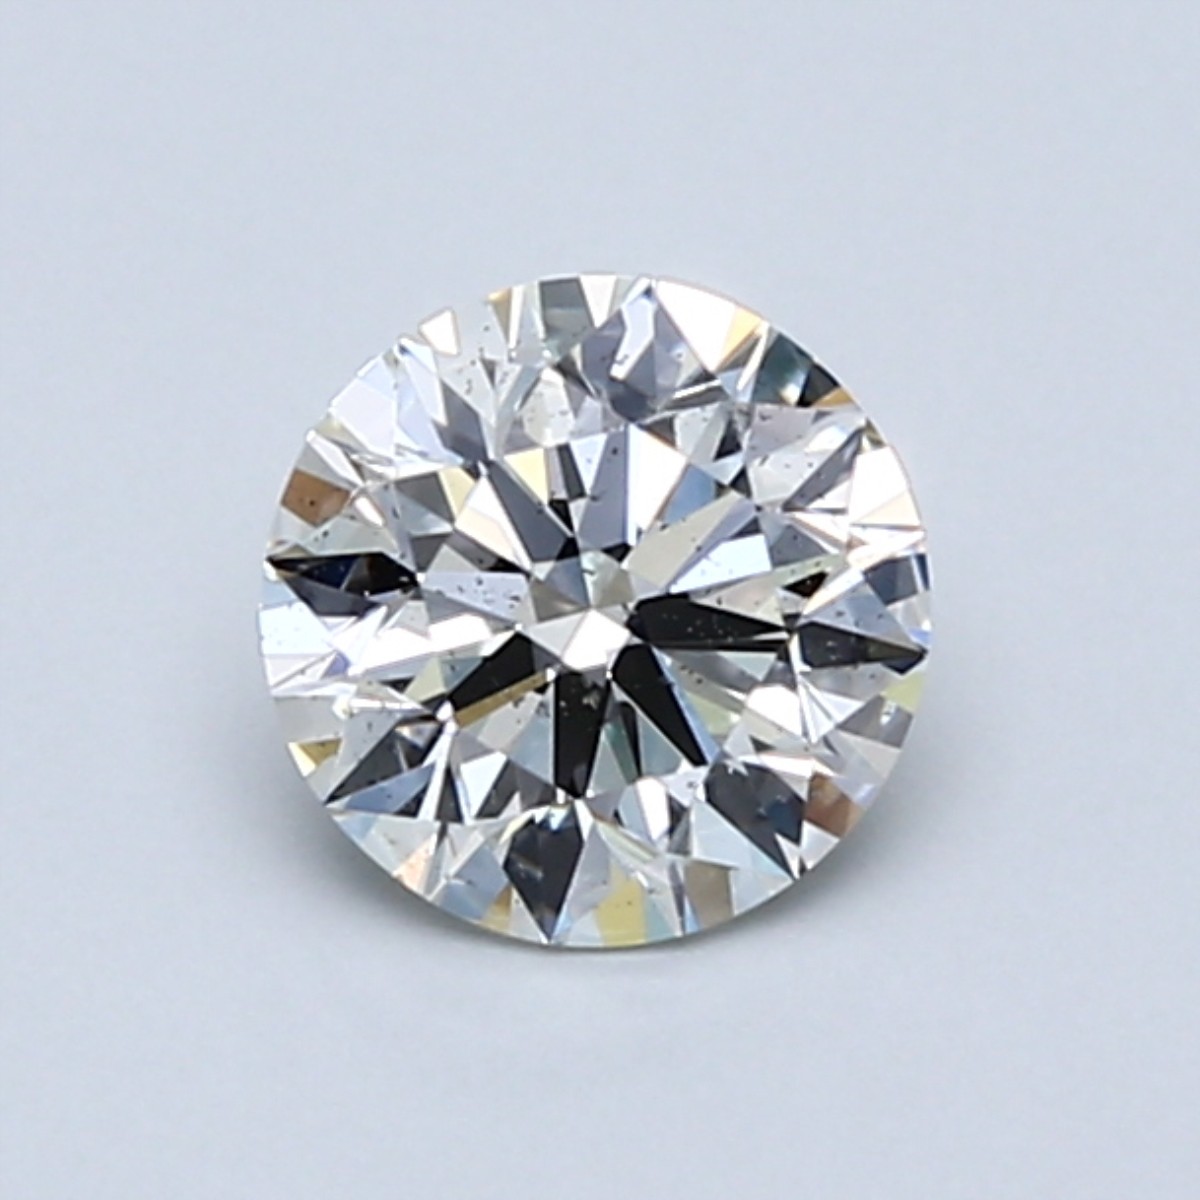 Round 0.8 Carat I Color SI2 Clarity For Sale